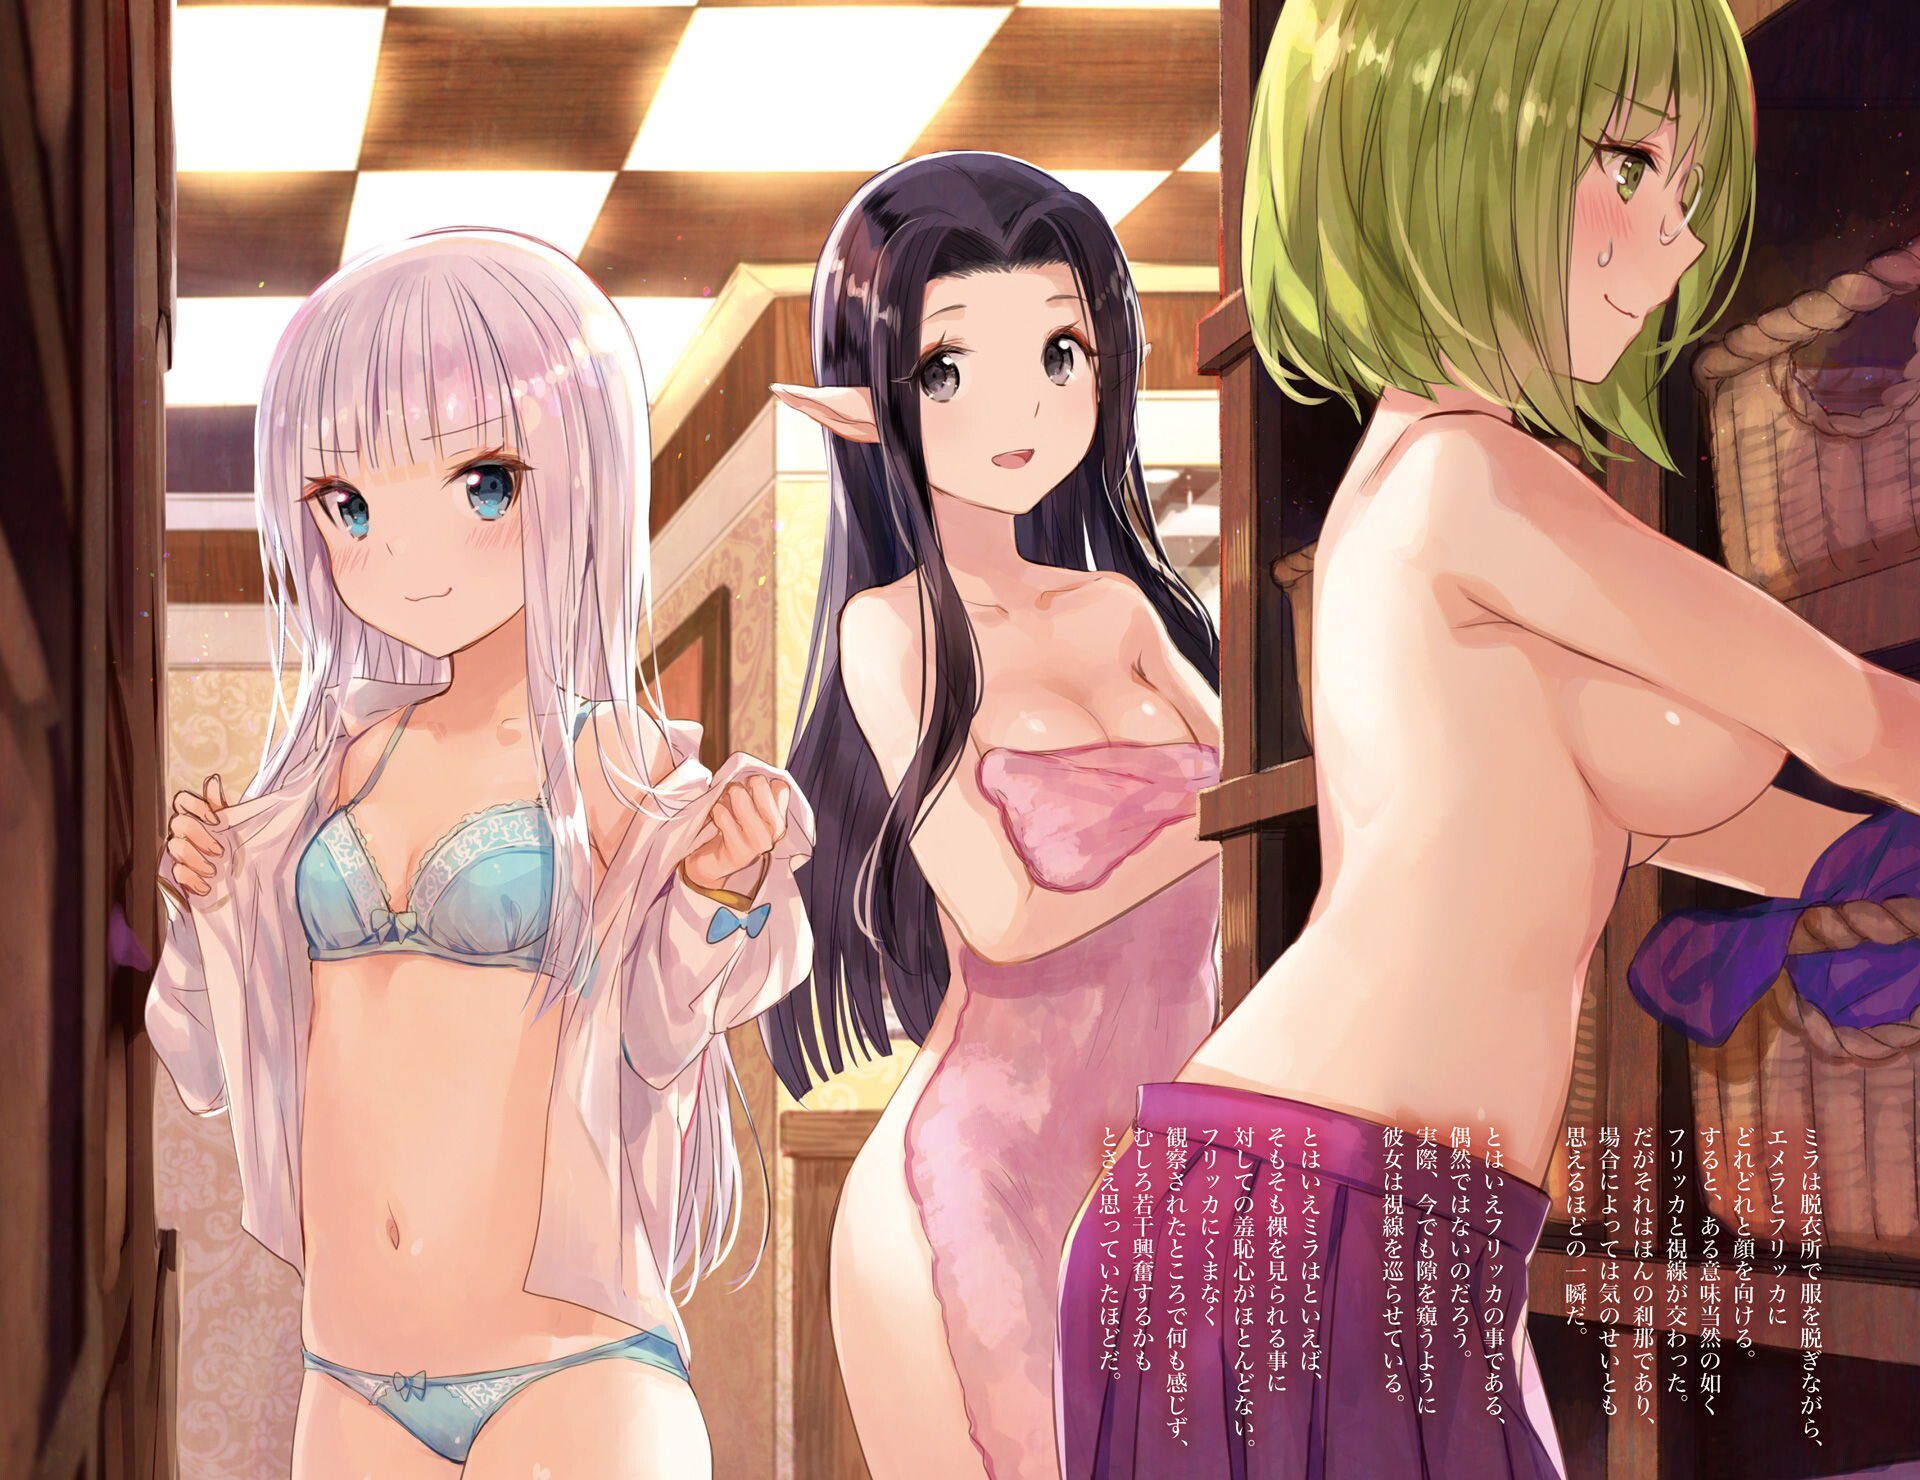 【Erotic Anime Summary】 Erotic images of beautiful women and beautiful girls whose clothes are about to be taken off [50 photos] 3